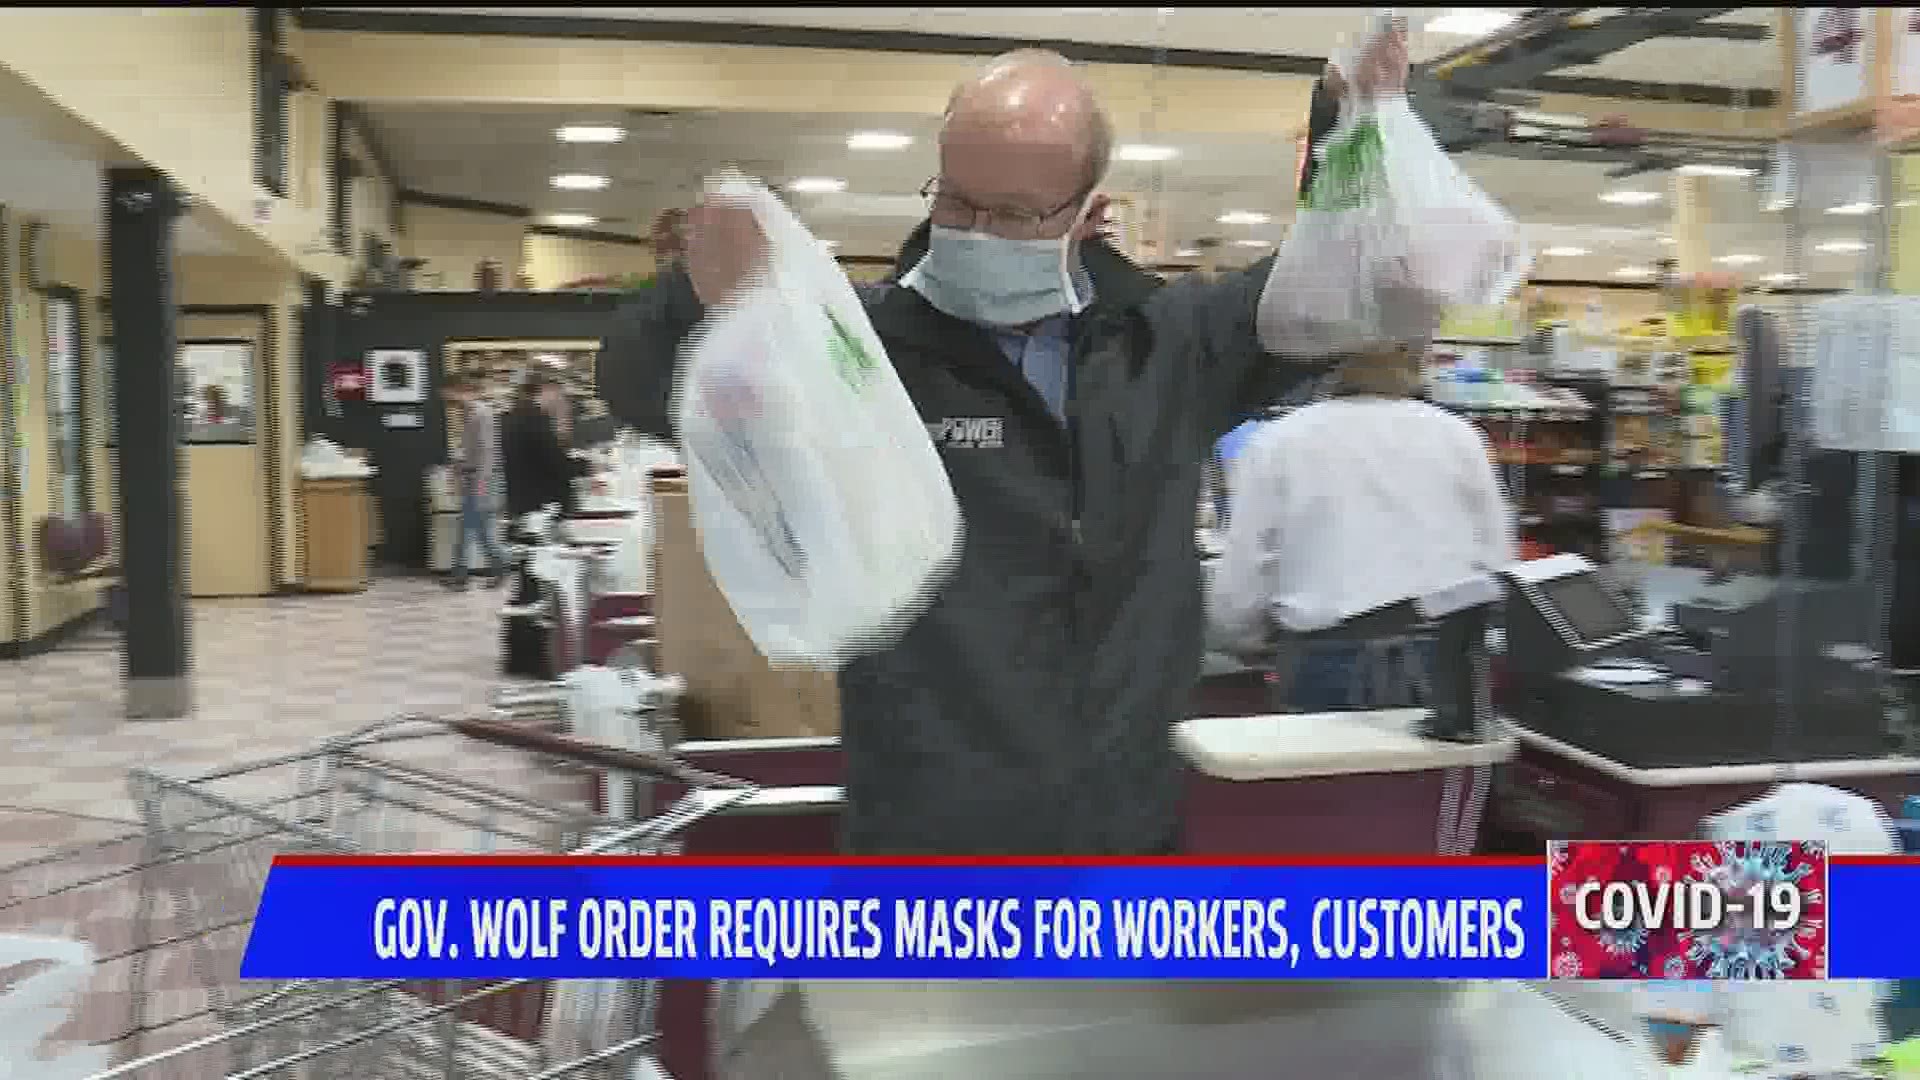 Starting Sunday night, anyone who wants to go grocery shopping must be wearing a mask, per Gov. Wolf's latest order, and shoppers will notice workers wearing them